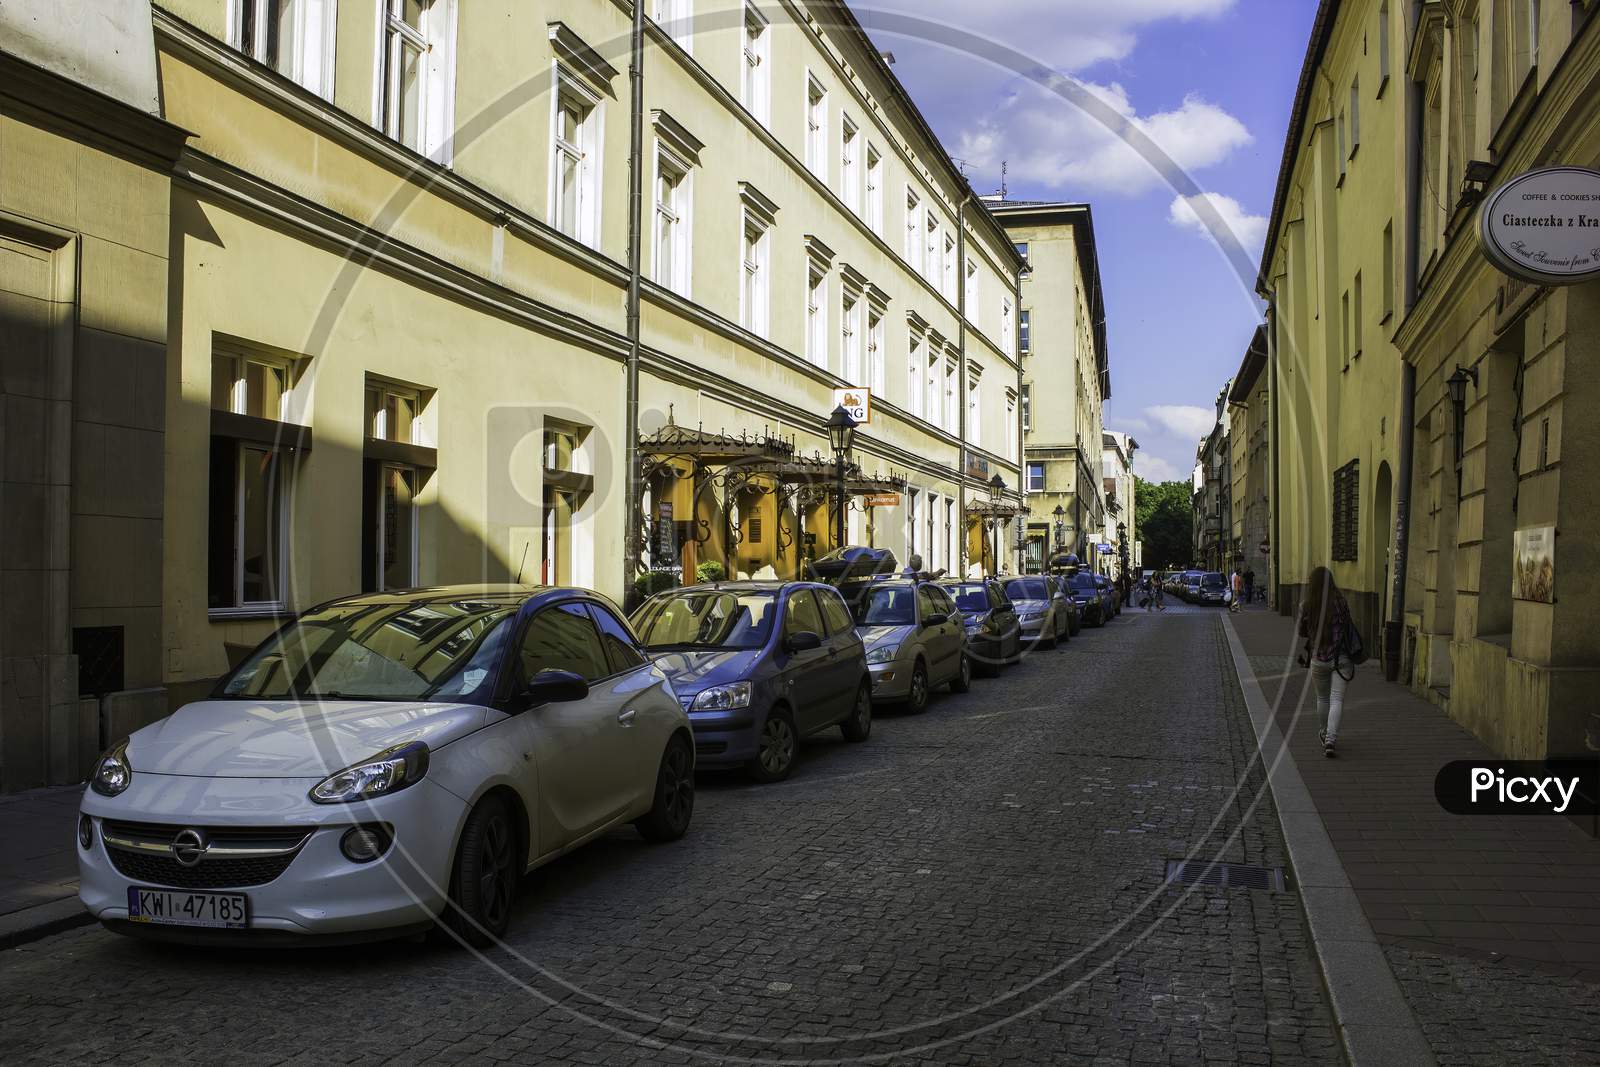 Krakow, Poland - May 23, 2014: Car Parking And European Architecture Street View